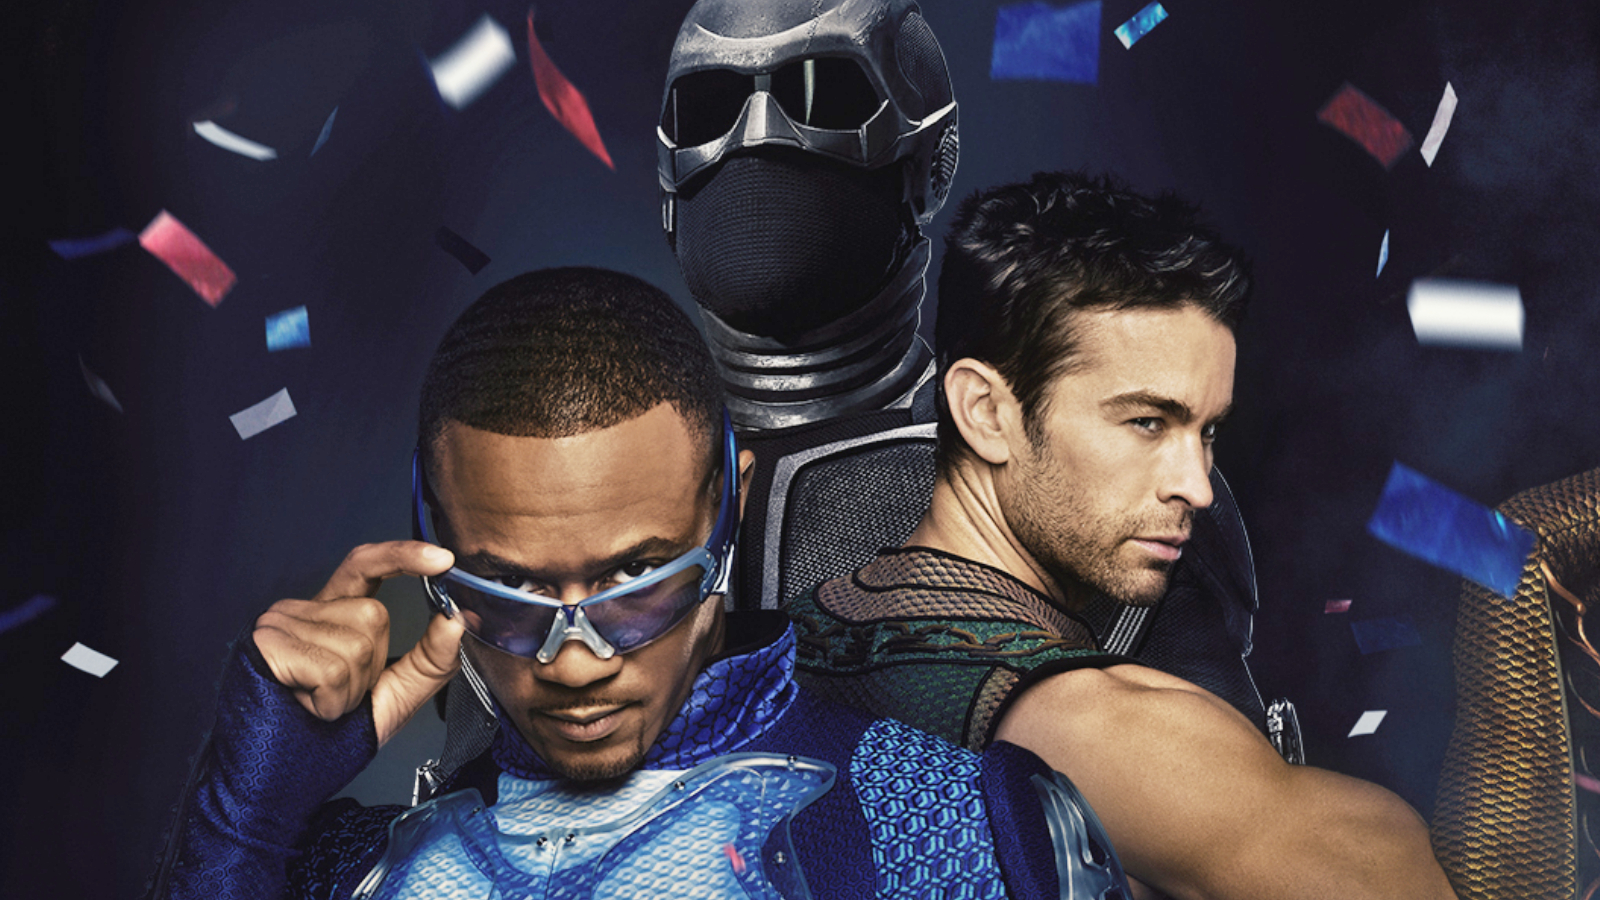 Cropped key art for The Boys Season 4 featuring A-Train, Black Noir, and The Deep